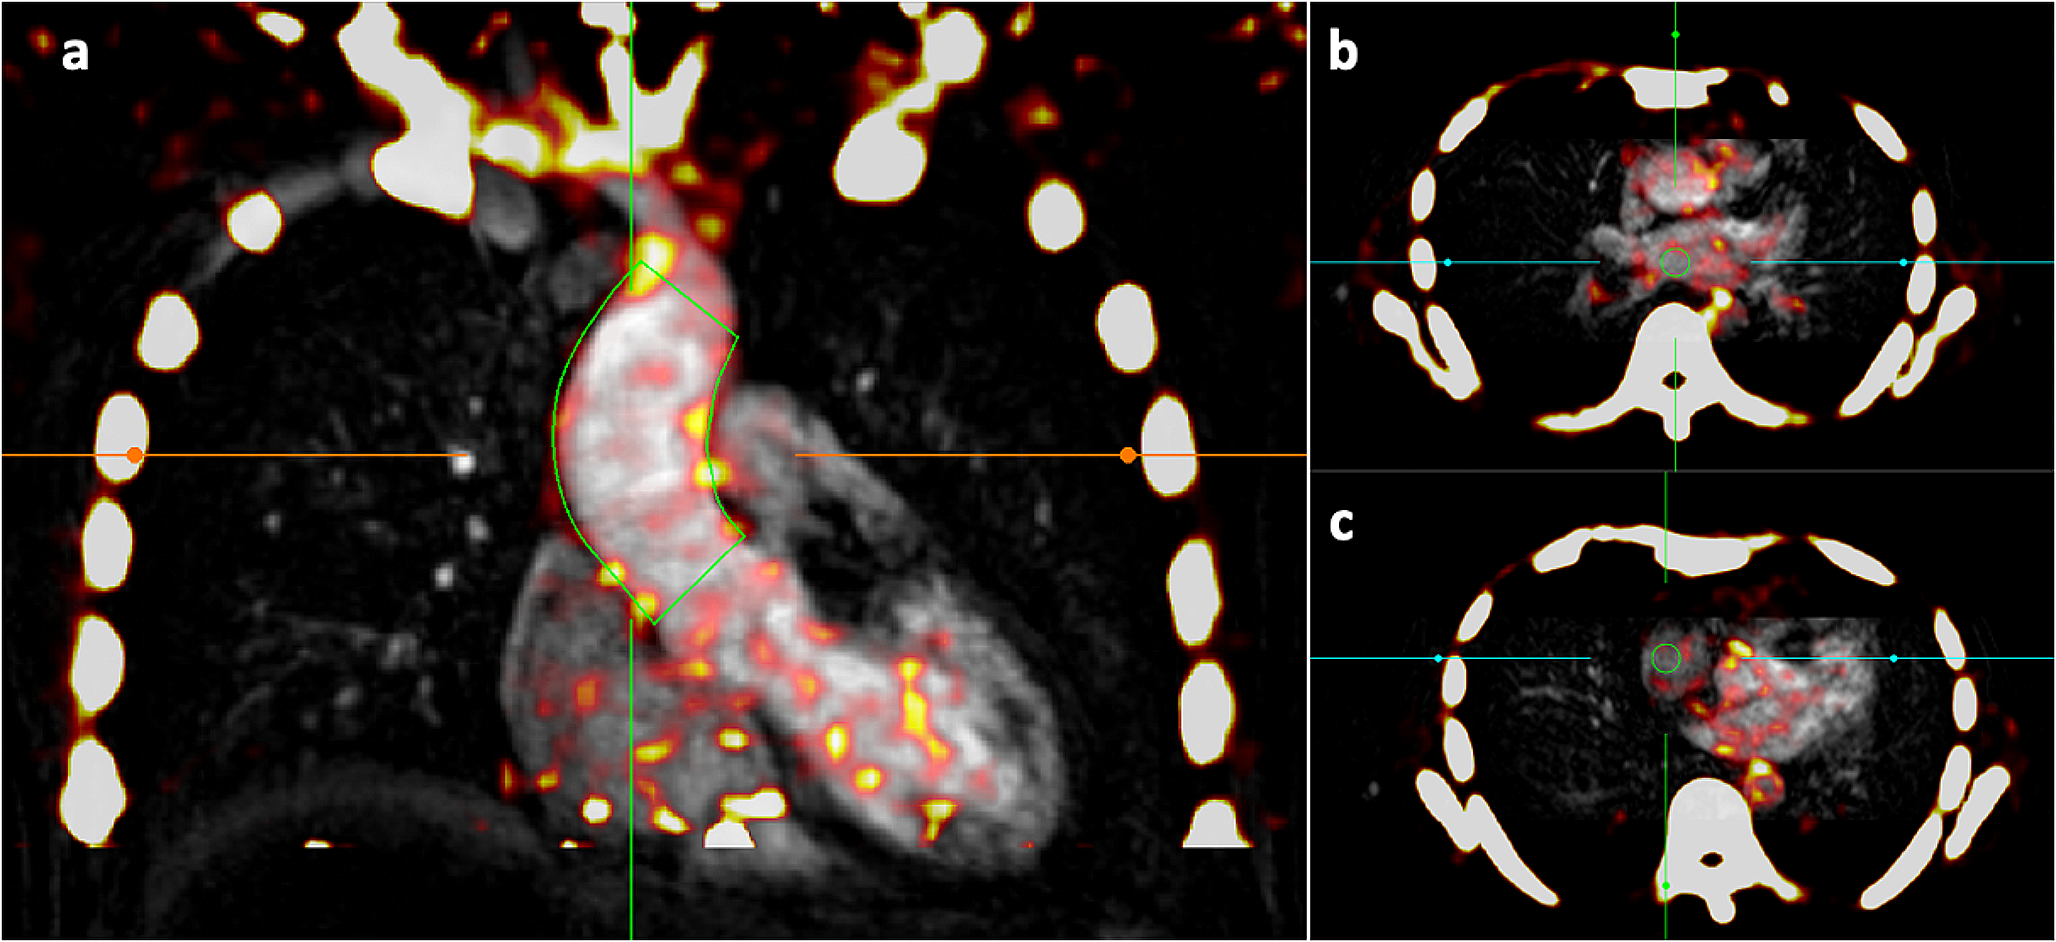 Thoracic aortic microcalcification activity in combined positron emission tomography and magnetic resonance imaging